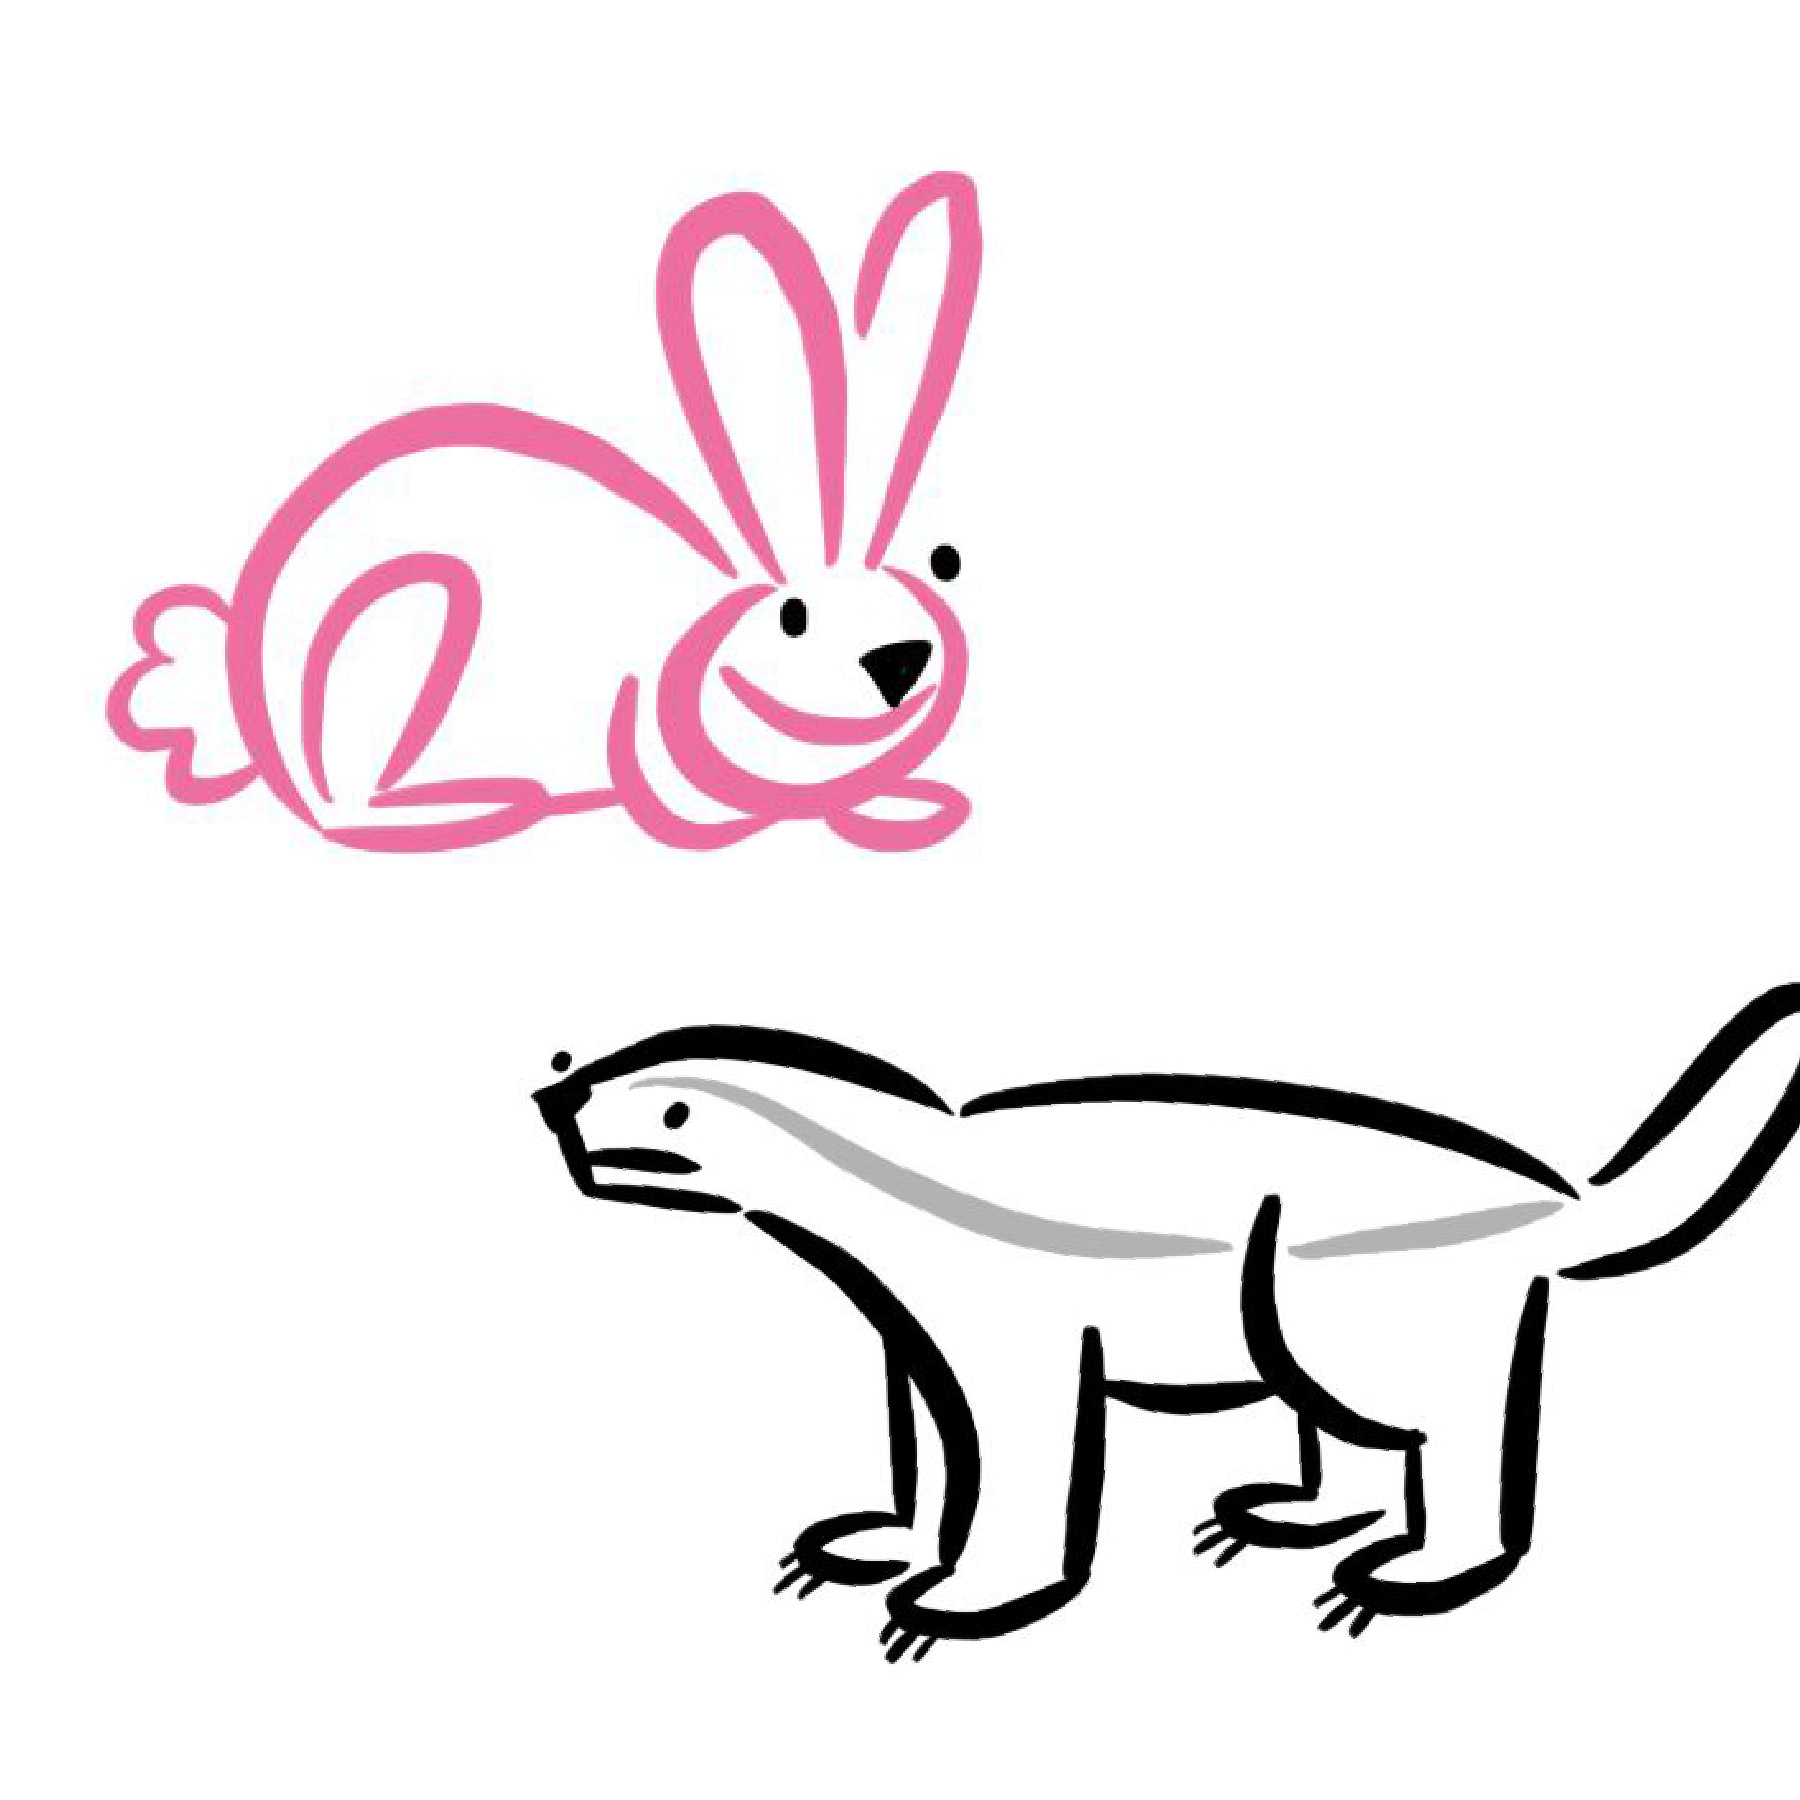 Cartoon drawing of a bunny and badger